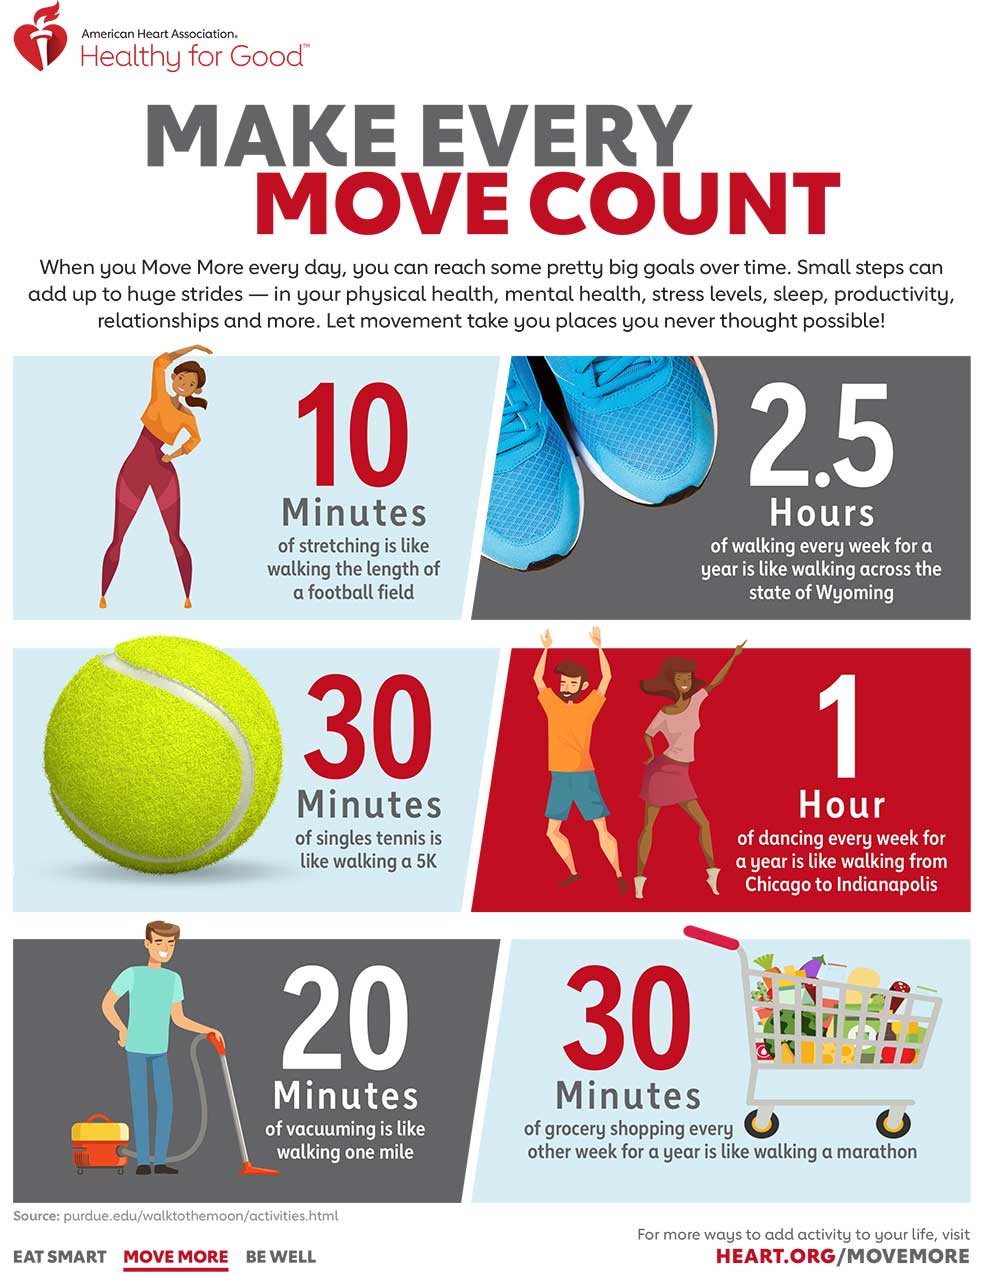 https://www.heart.org/-/media/Healthy-Living-Images/Infographics/Make_every_move_count_activity_infographic.jpg